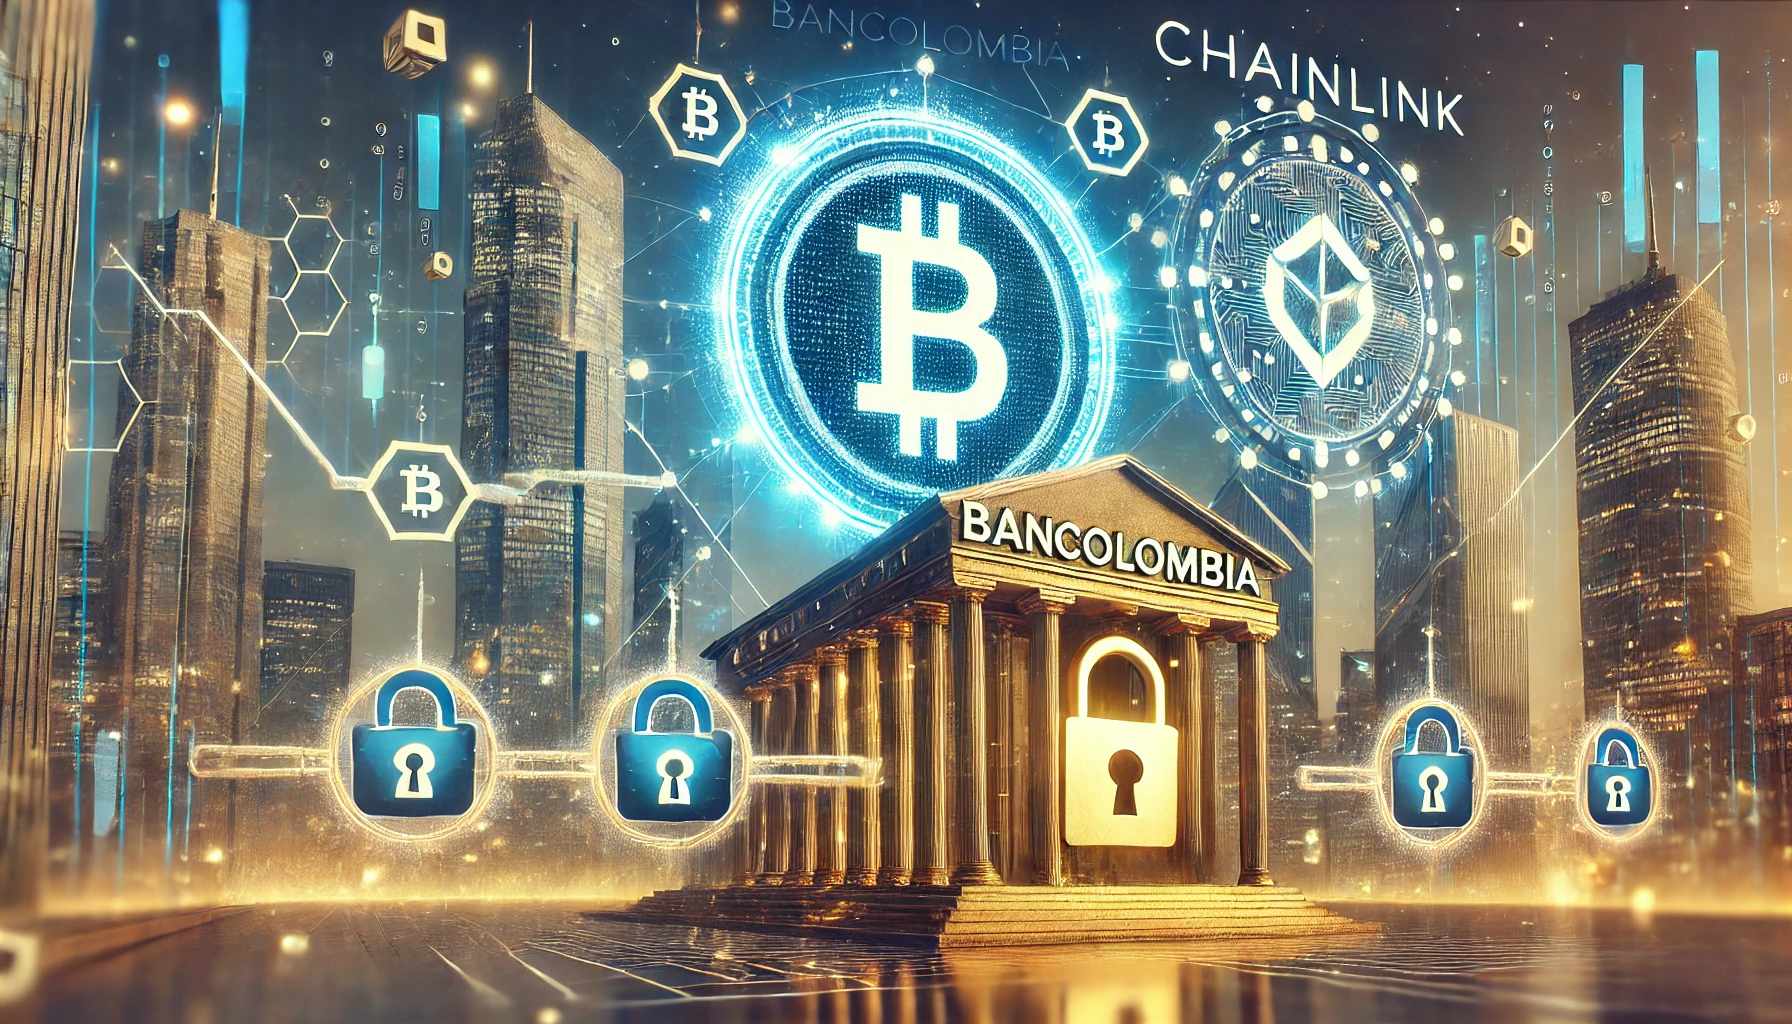 Bancolombia and Chainlink Collaborate to Secure Stablecoin Operations